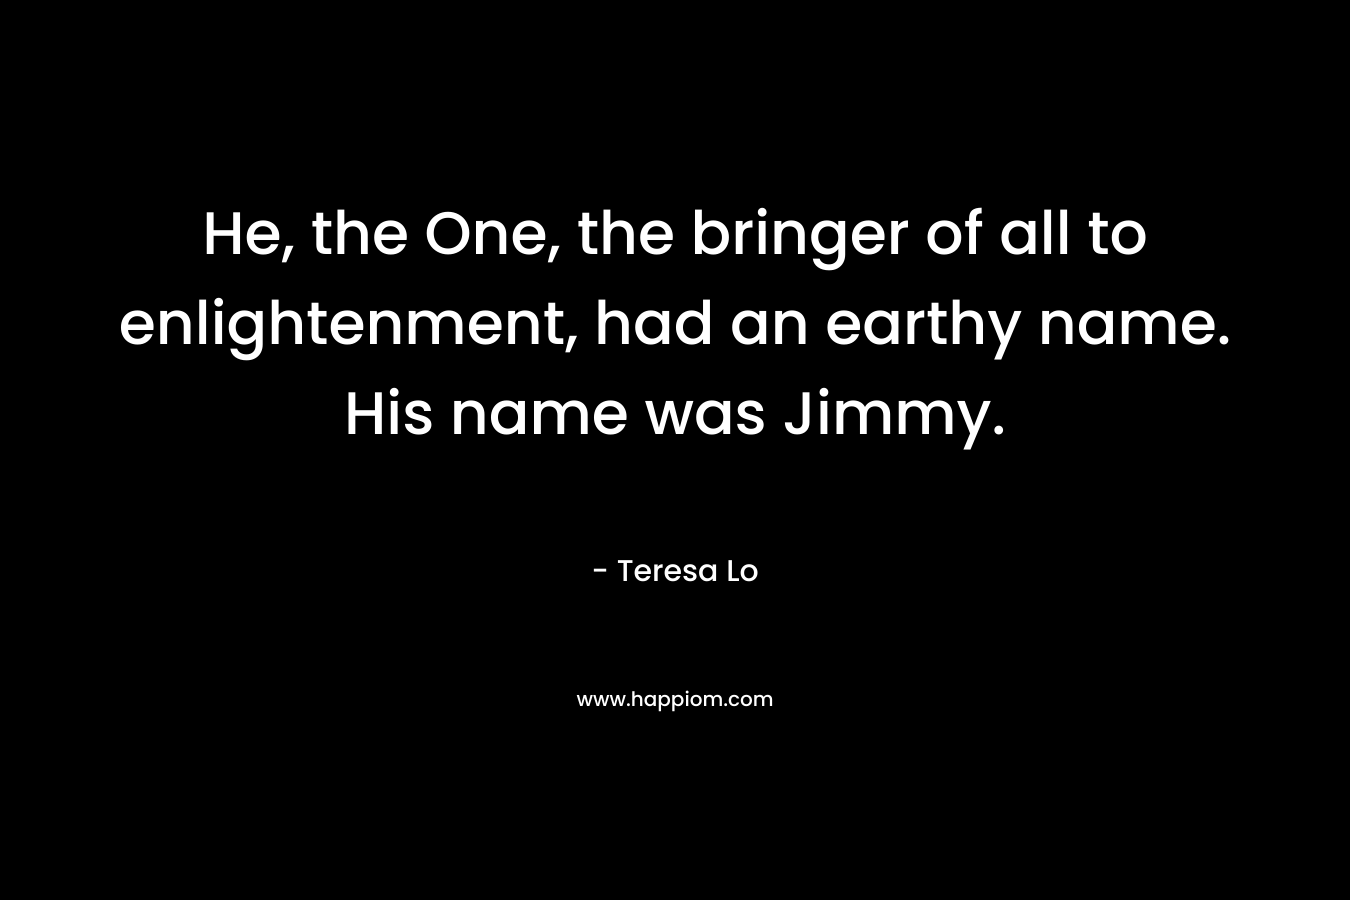 He, the One, the bringer of all to enlightenment, had an earthy name. His name was Jimmy. – Teresa Lo